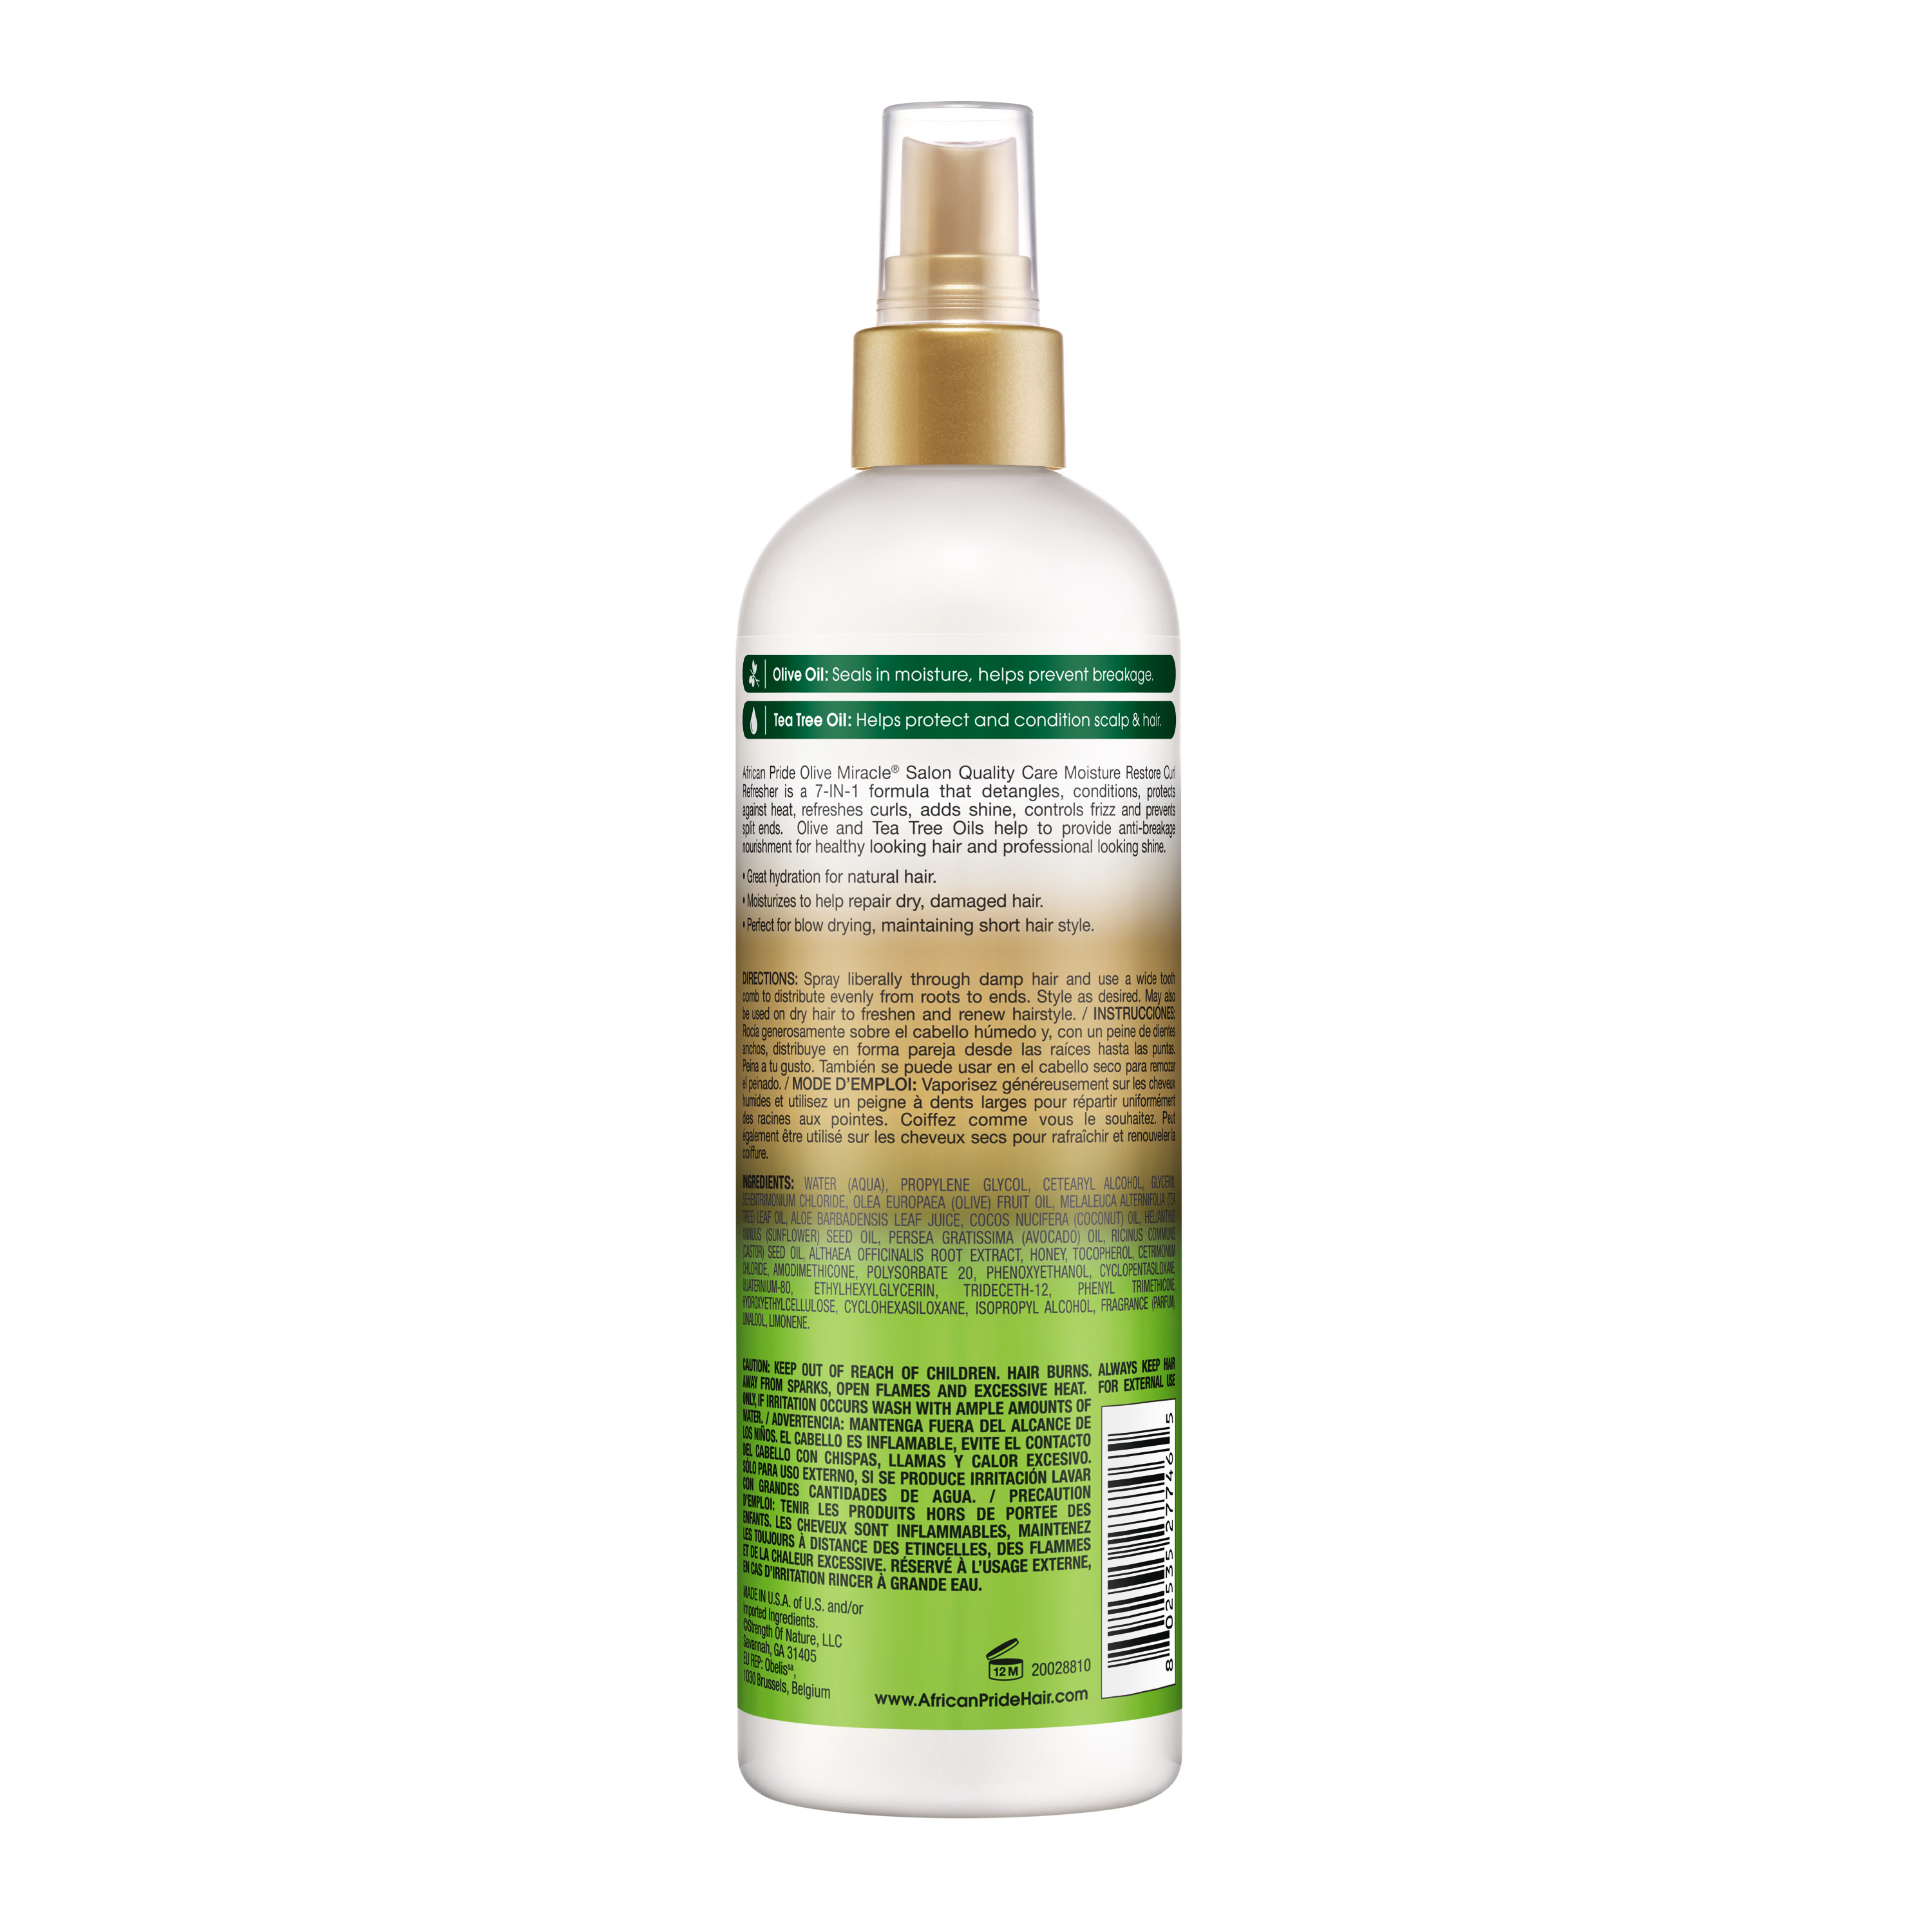 African Pride Olive Miracle Moisture Refresher Spray 12 oz., for Women, Moisturizing - image 2 of 6